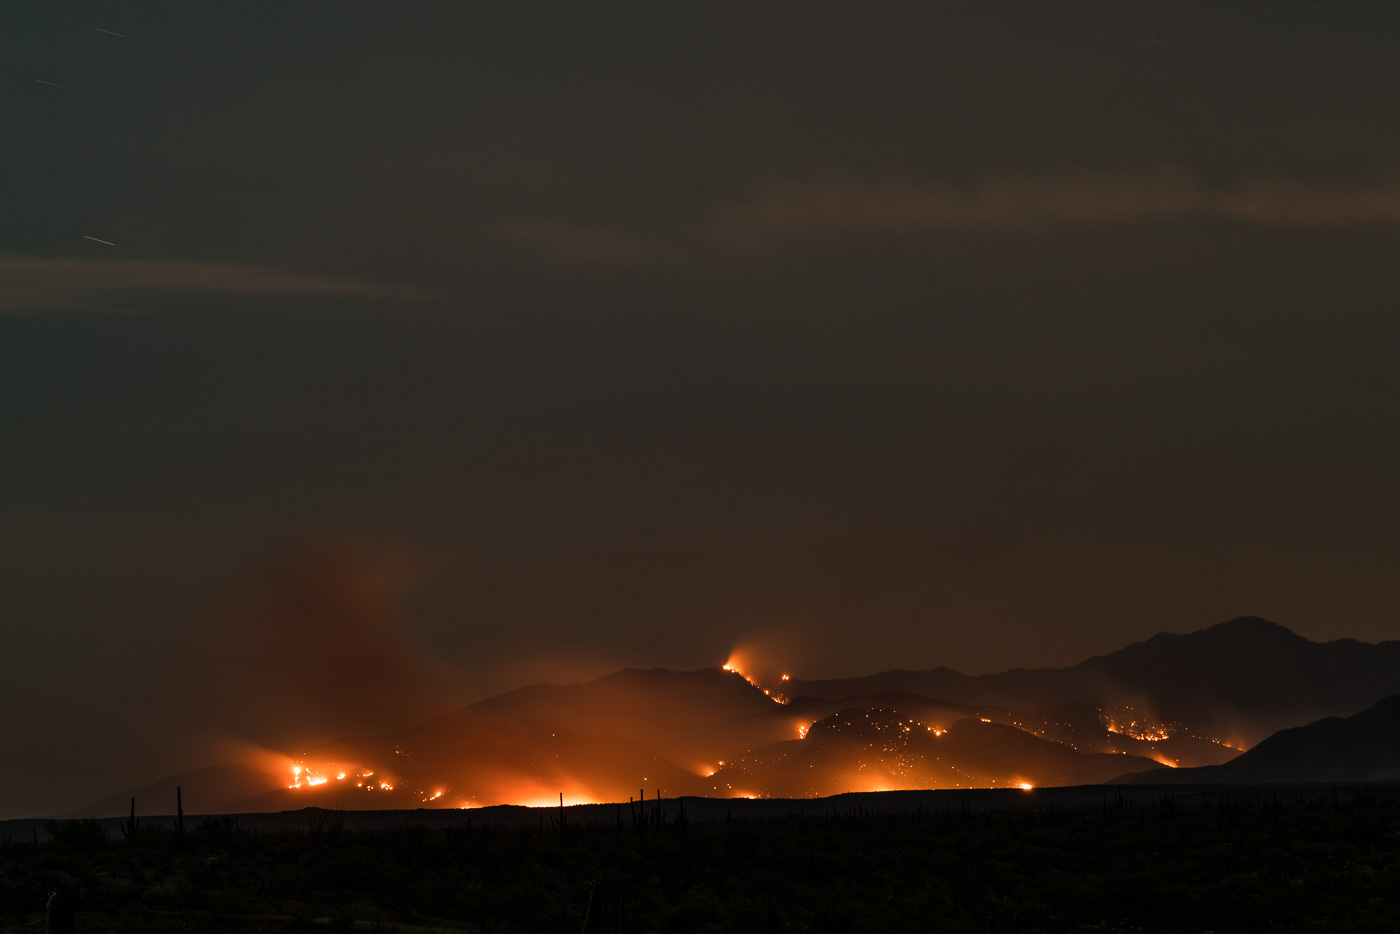 Evans Mountain and the slopes below burning in the Burro Fire on the night of the 5th. July 2017.